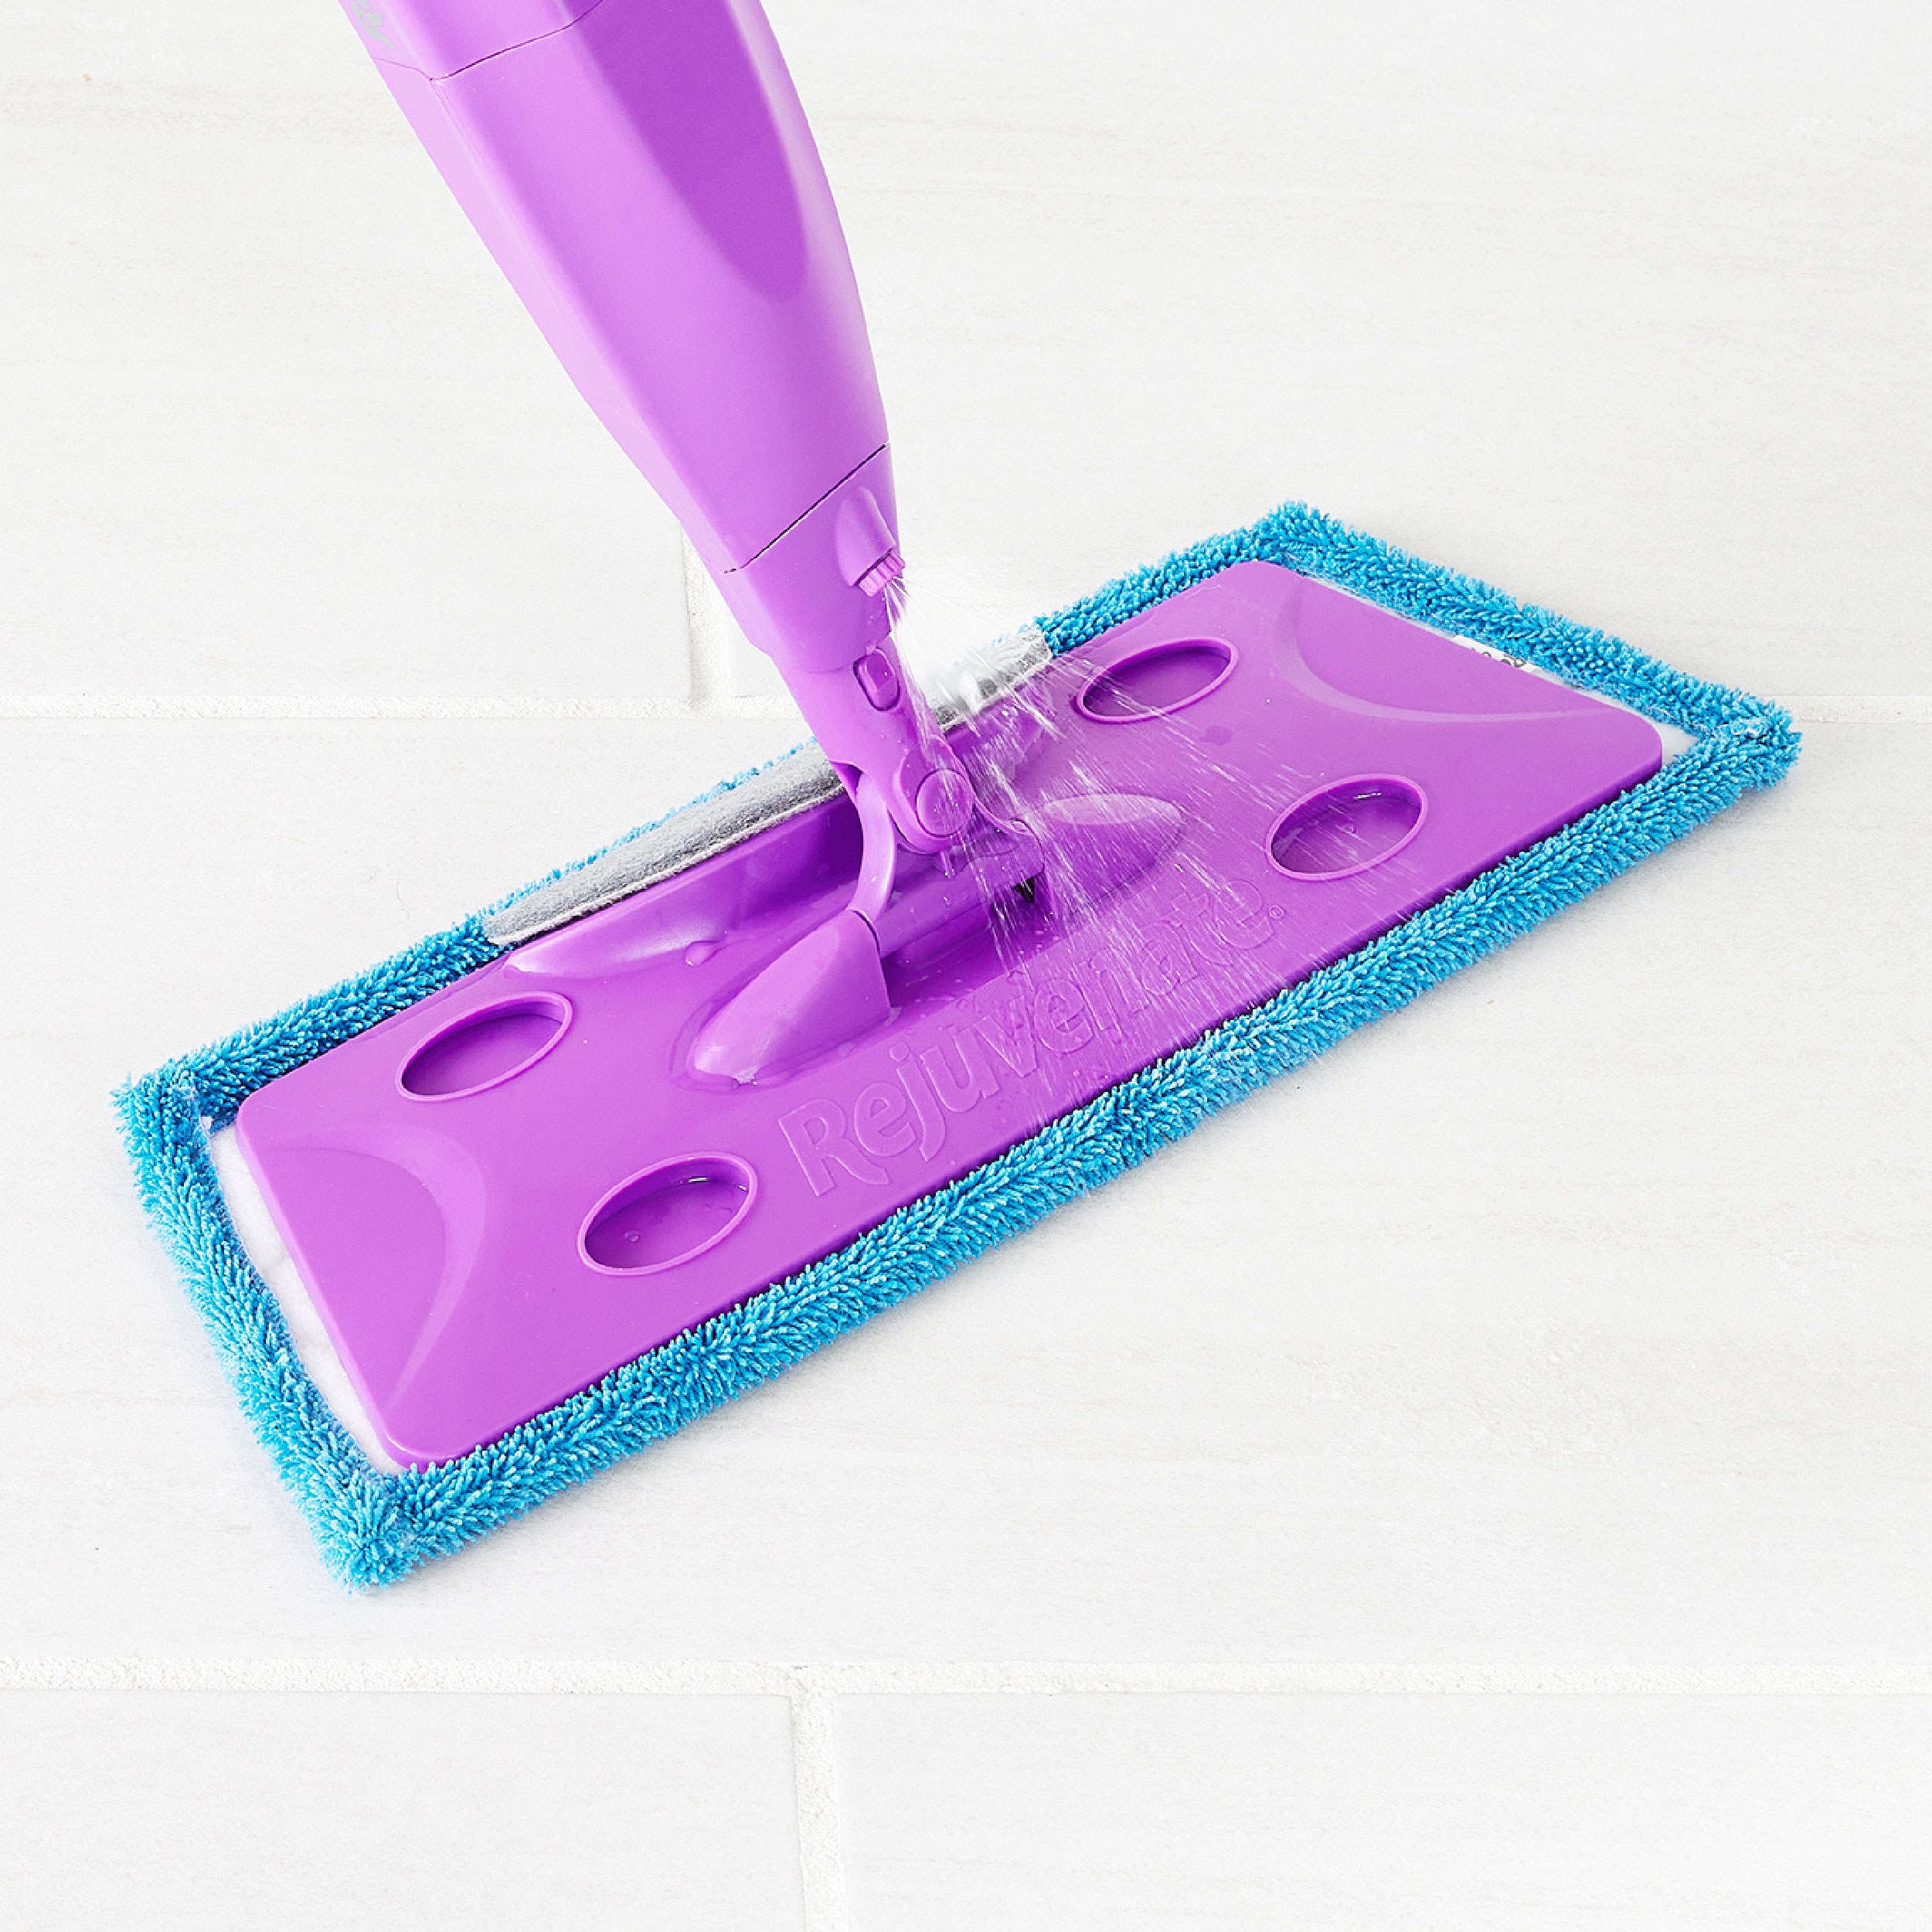 Why the Best Mop is From Rejuvenate Brand Thumbnail